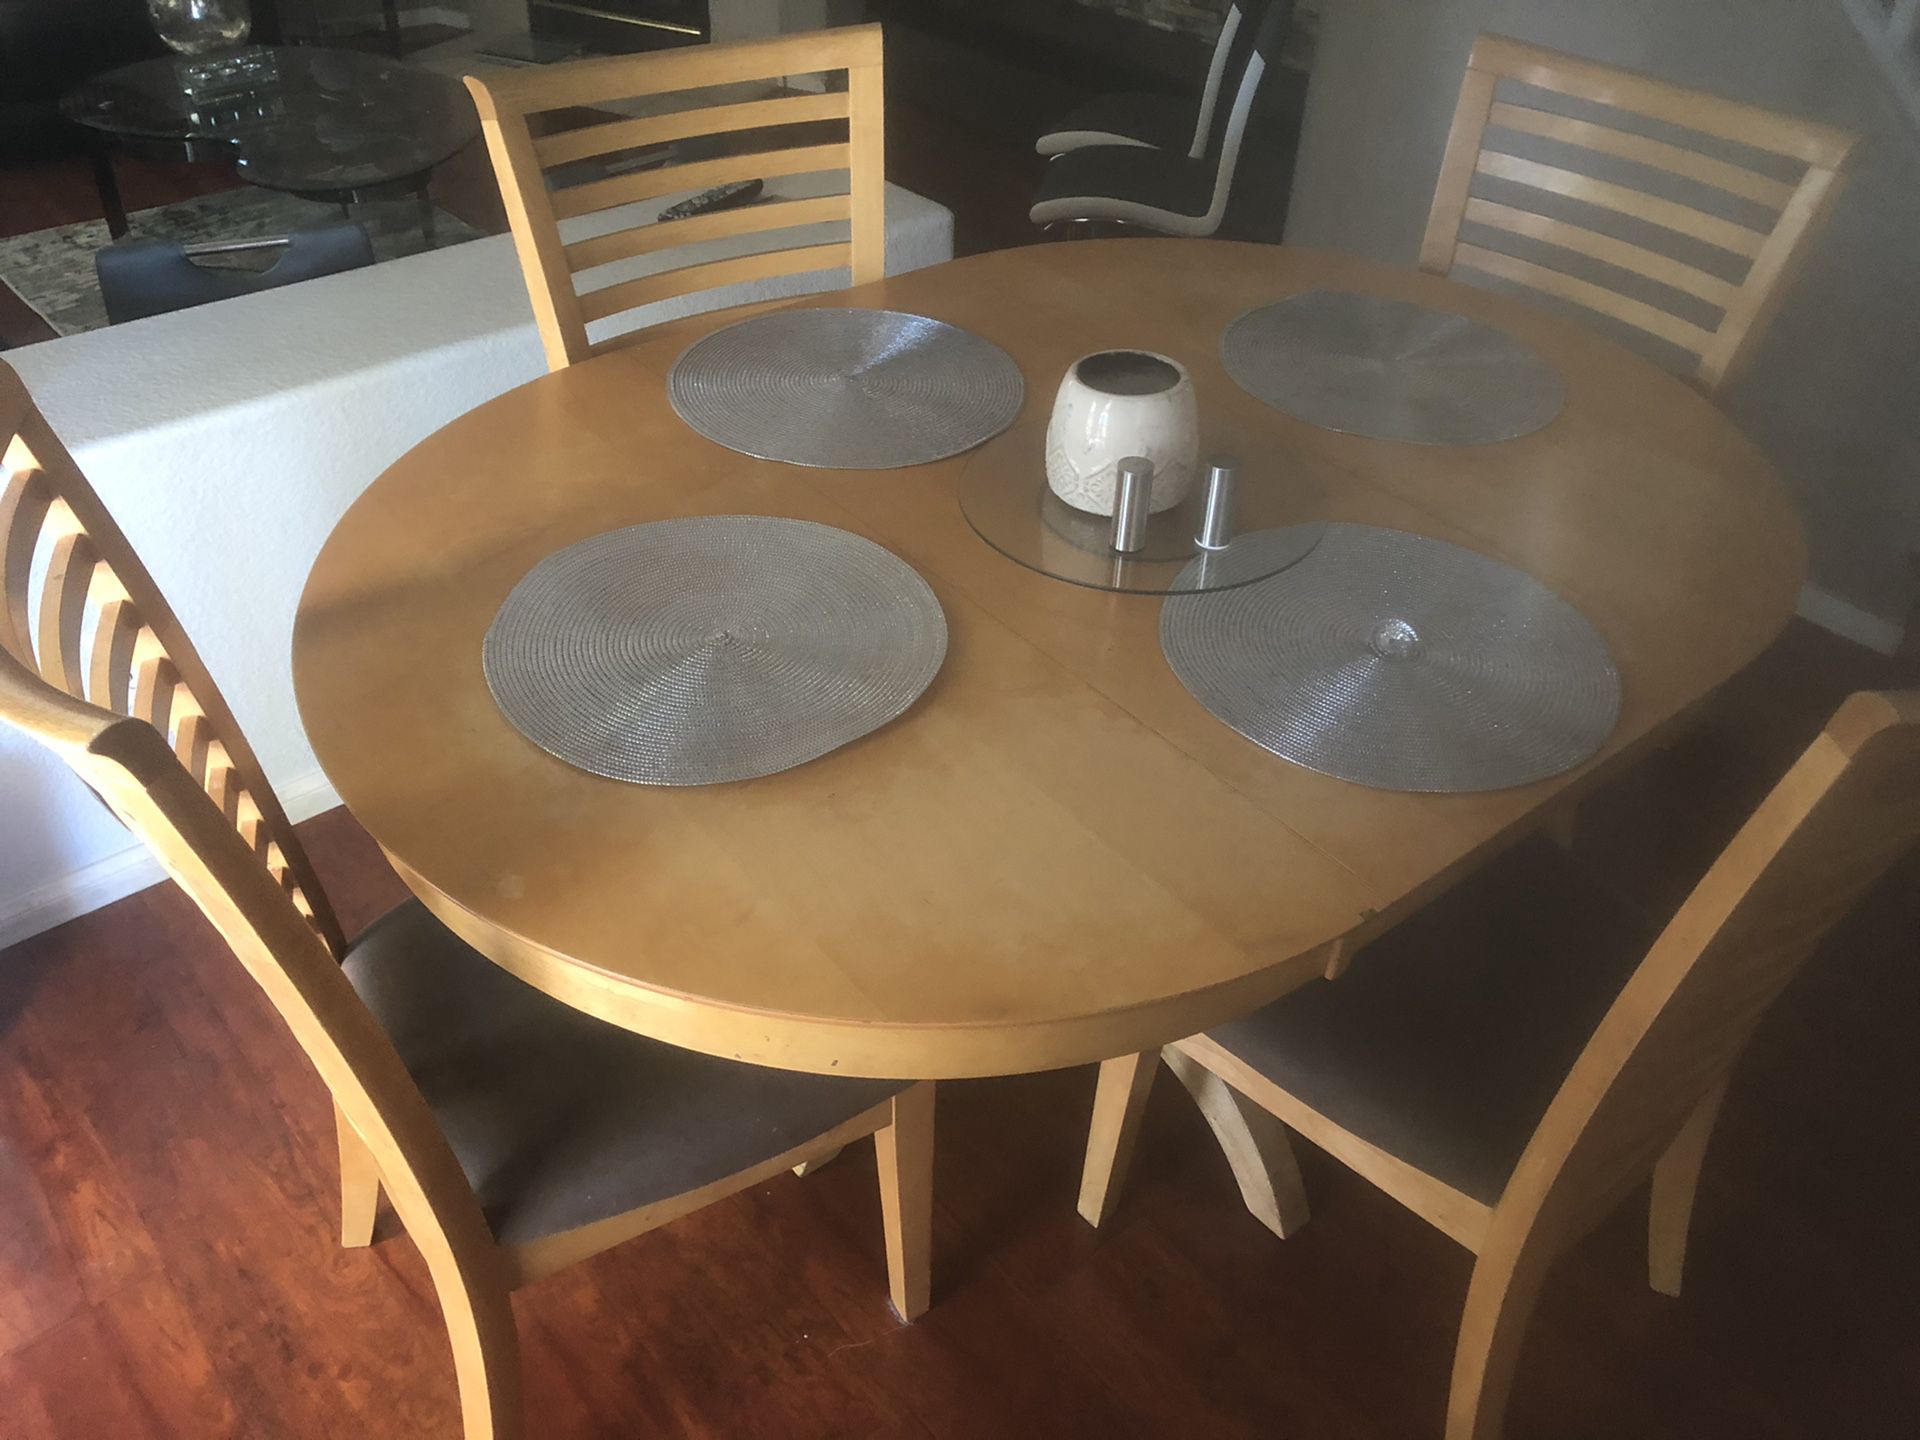 Kitchen Dining Table with 4 chairs